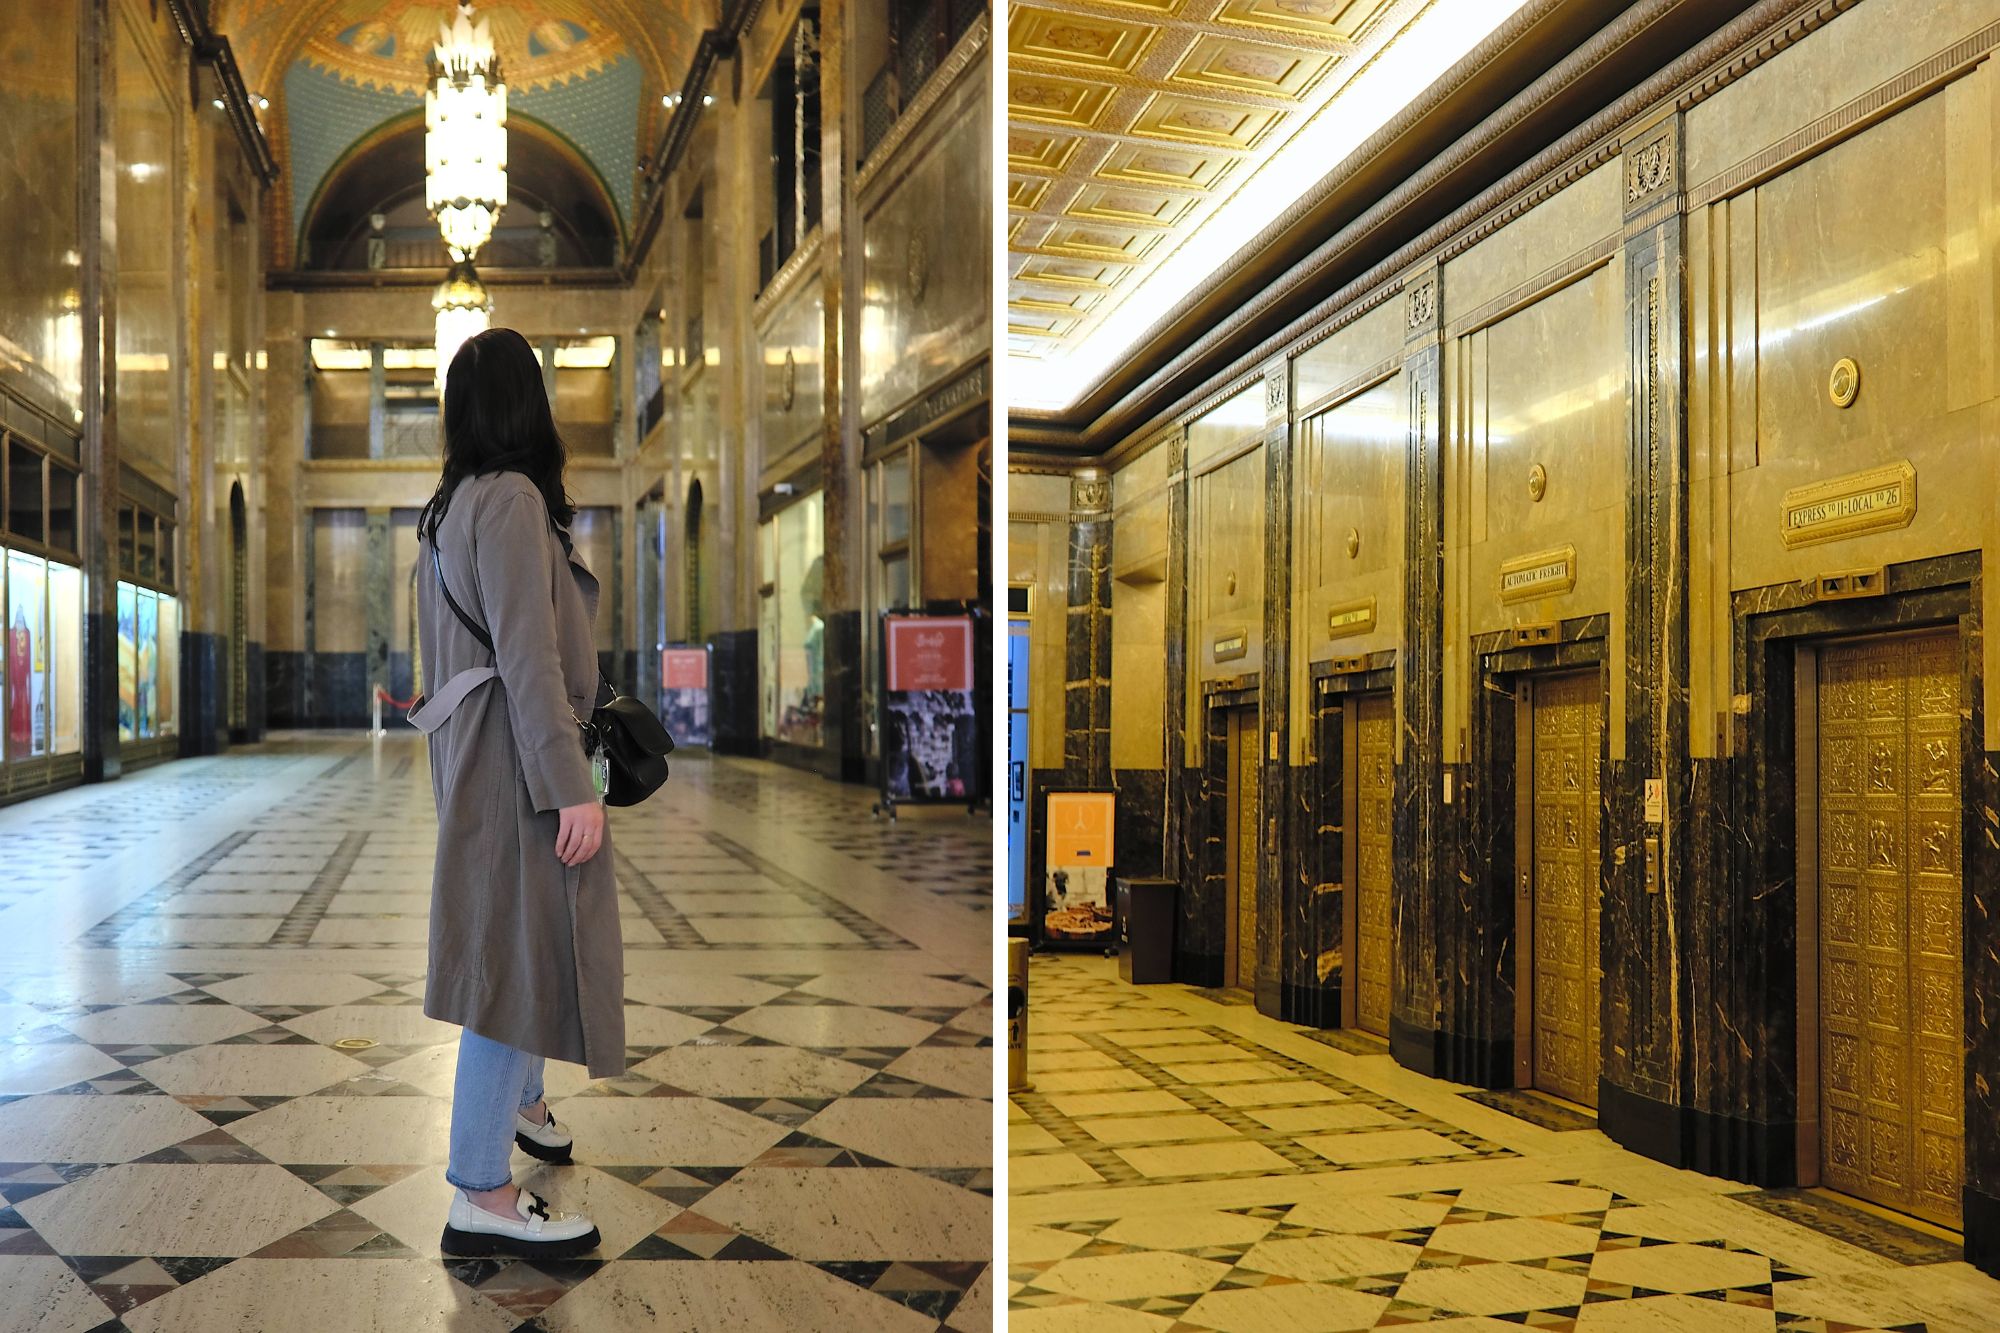 Two images in the Fisher Building: one of Alyssa in a hallway, and one of the elevators